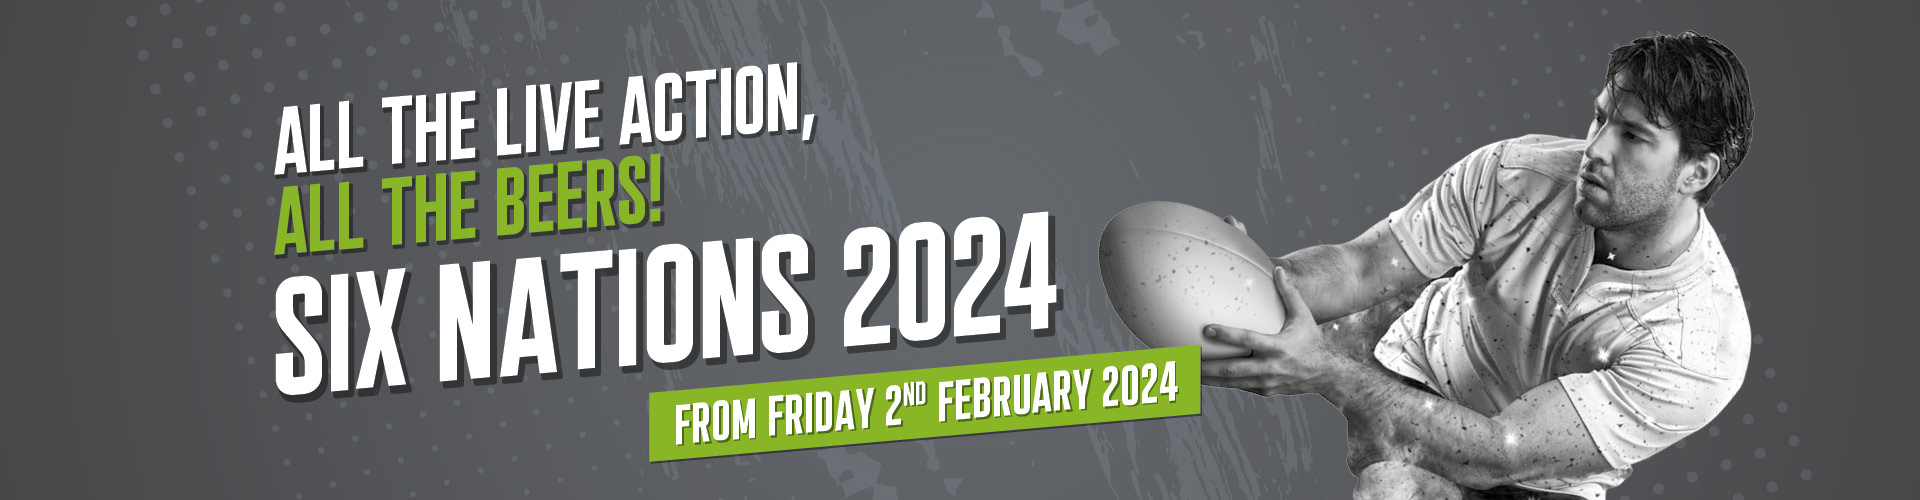 Six Nations 2024 at The Beehive